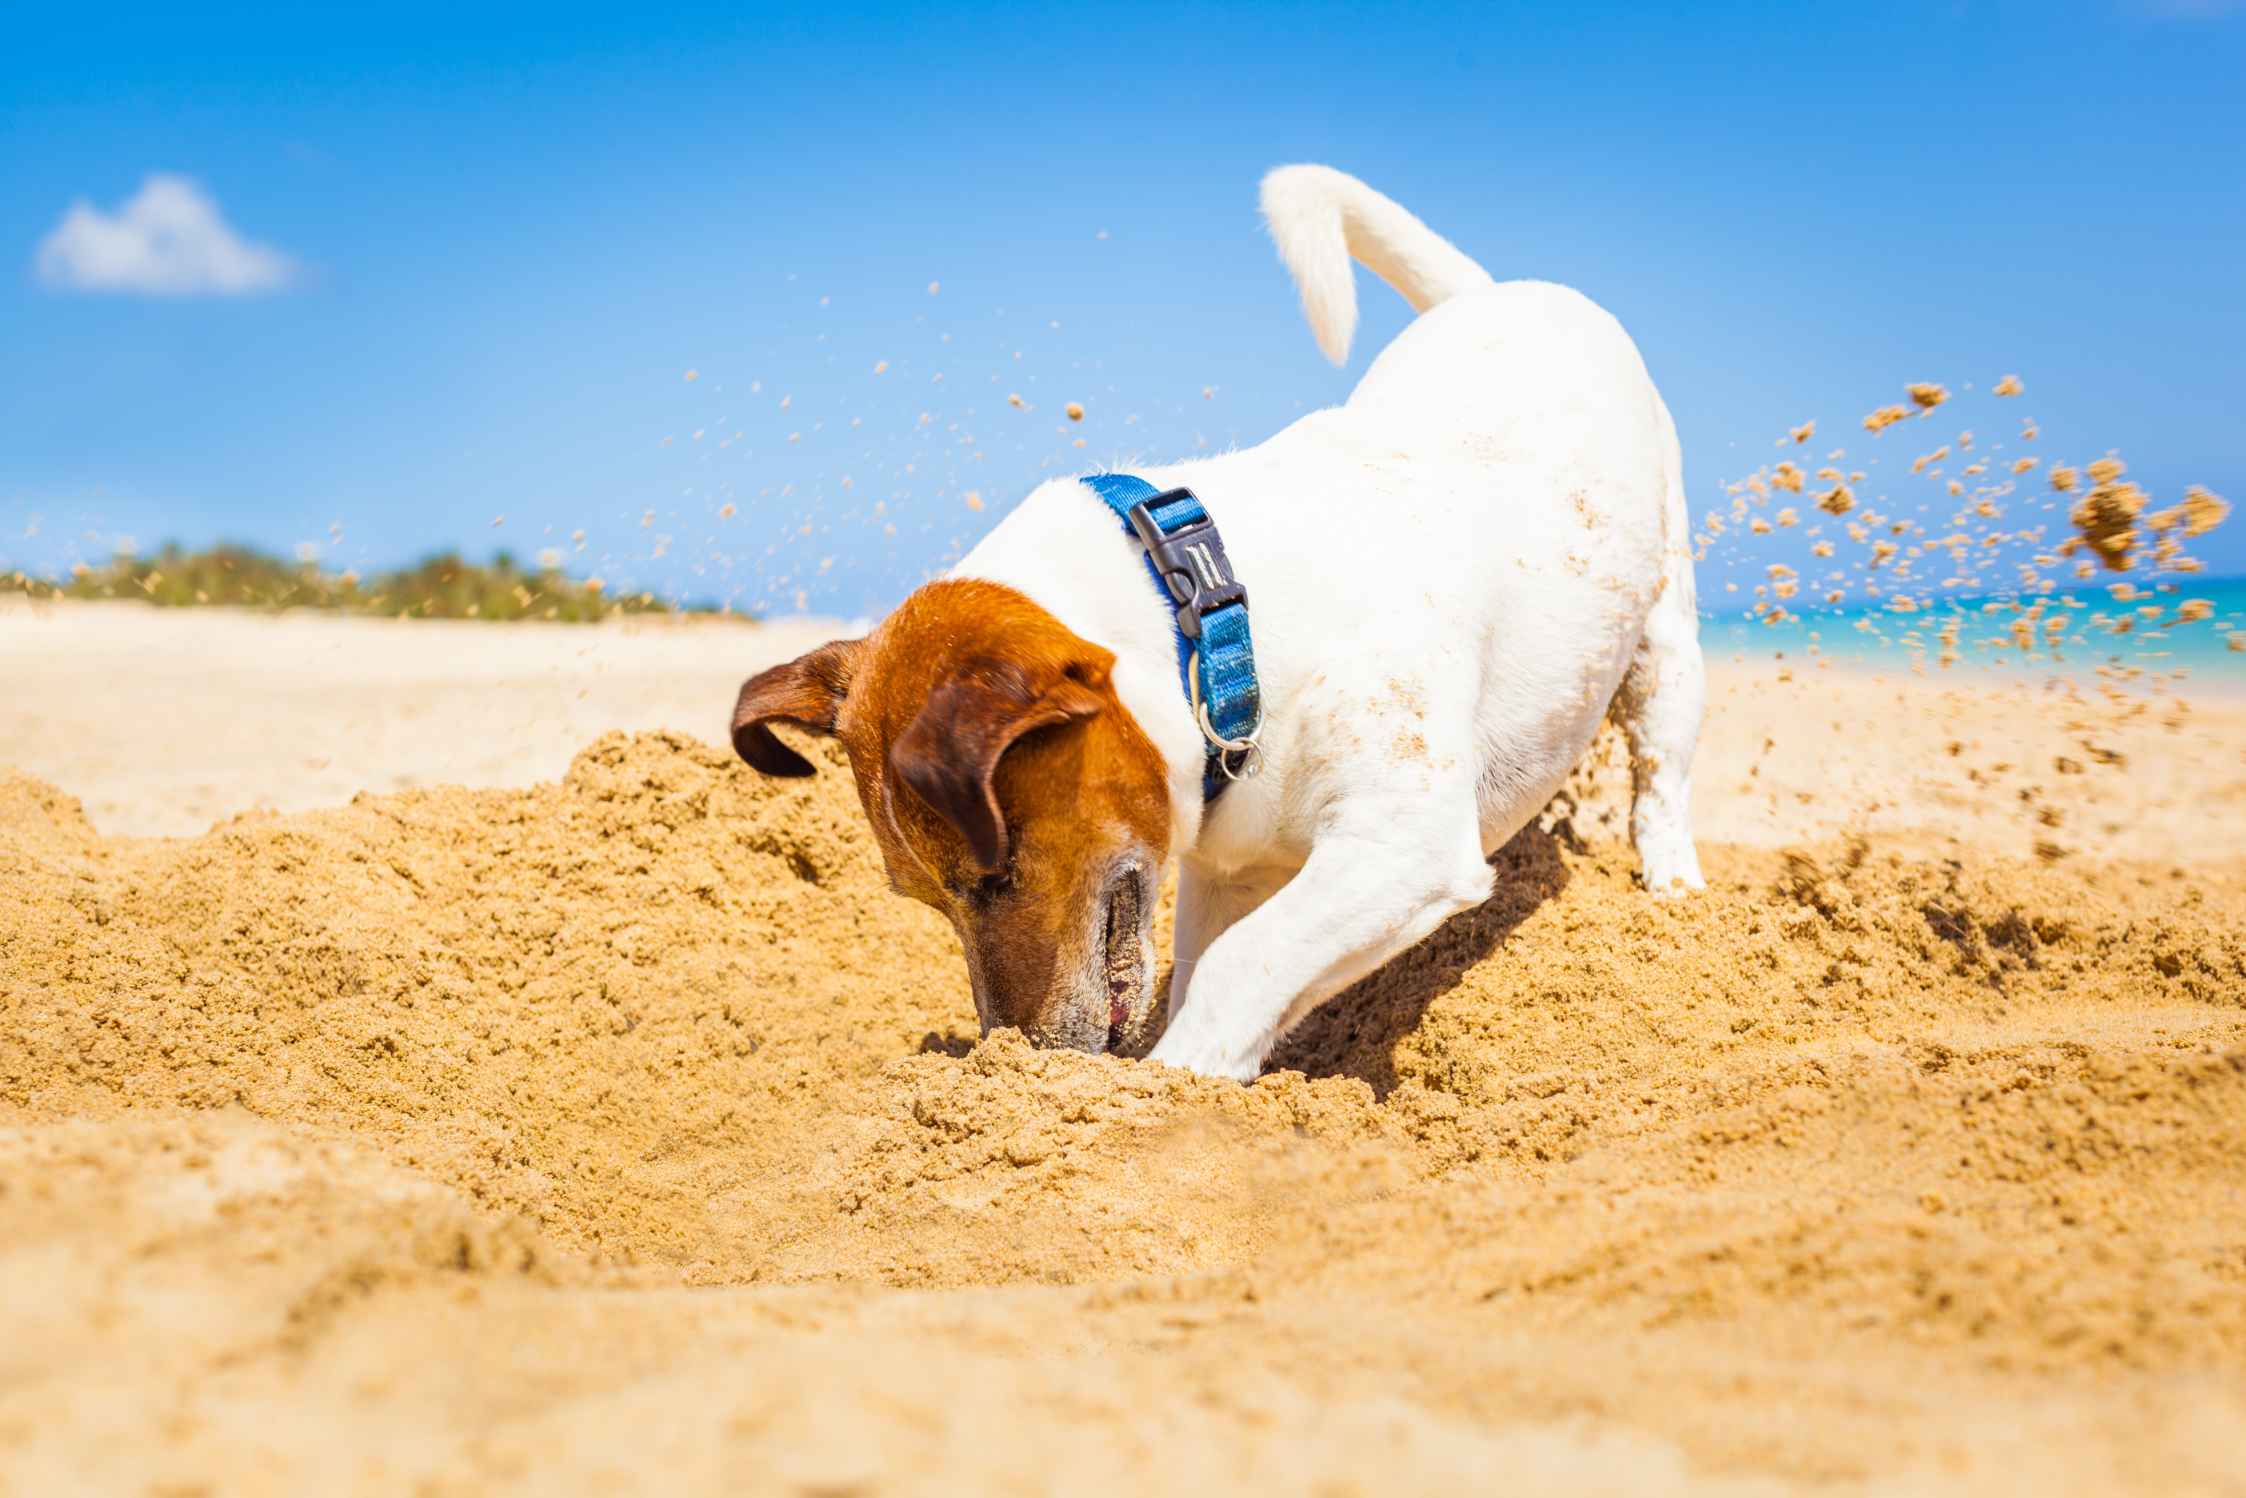 Jack Russell dog digging a hole in the sand